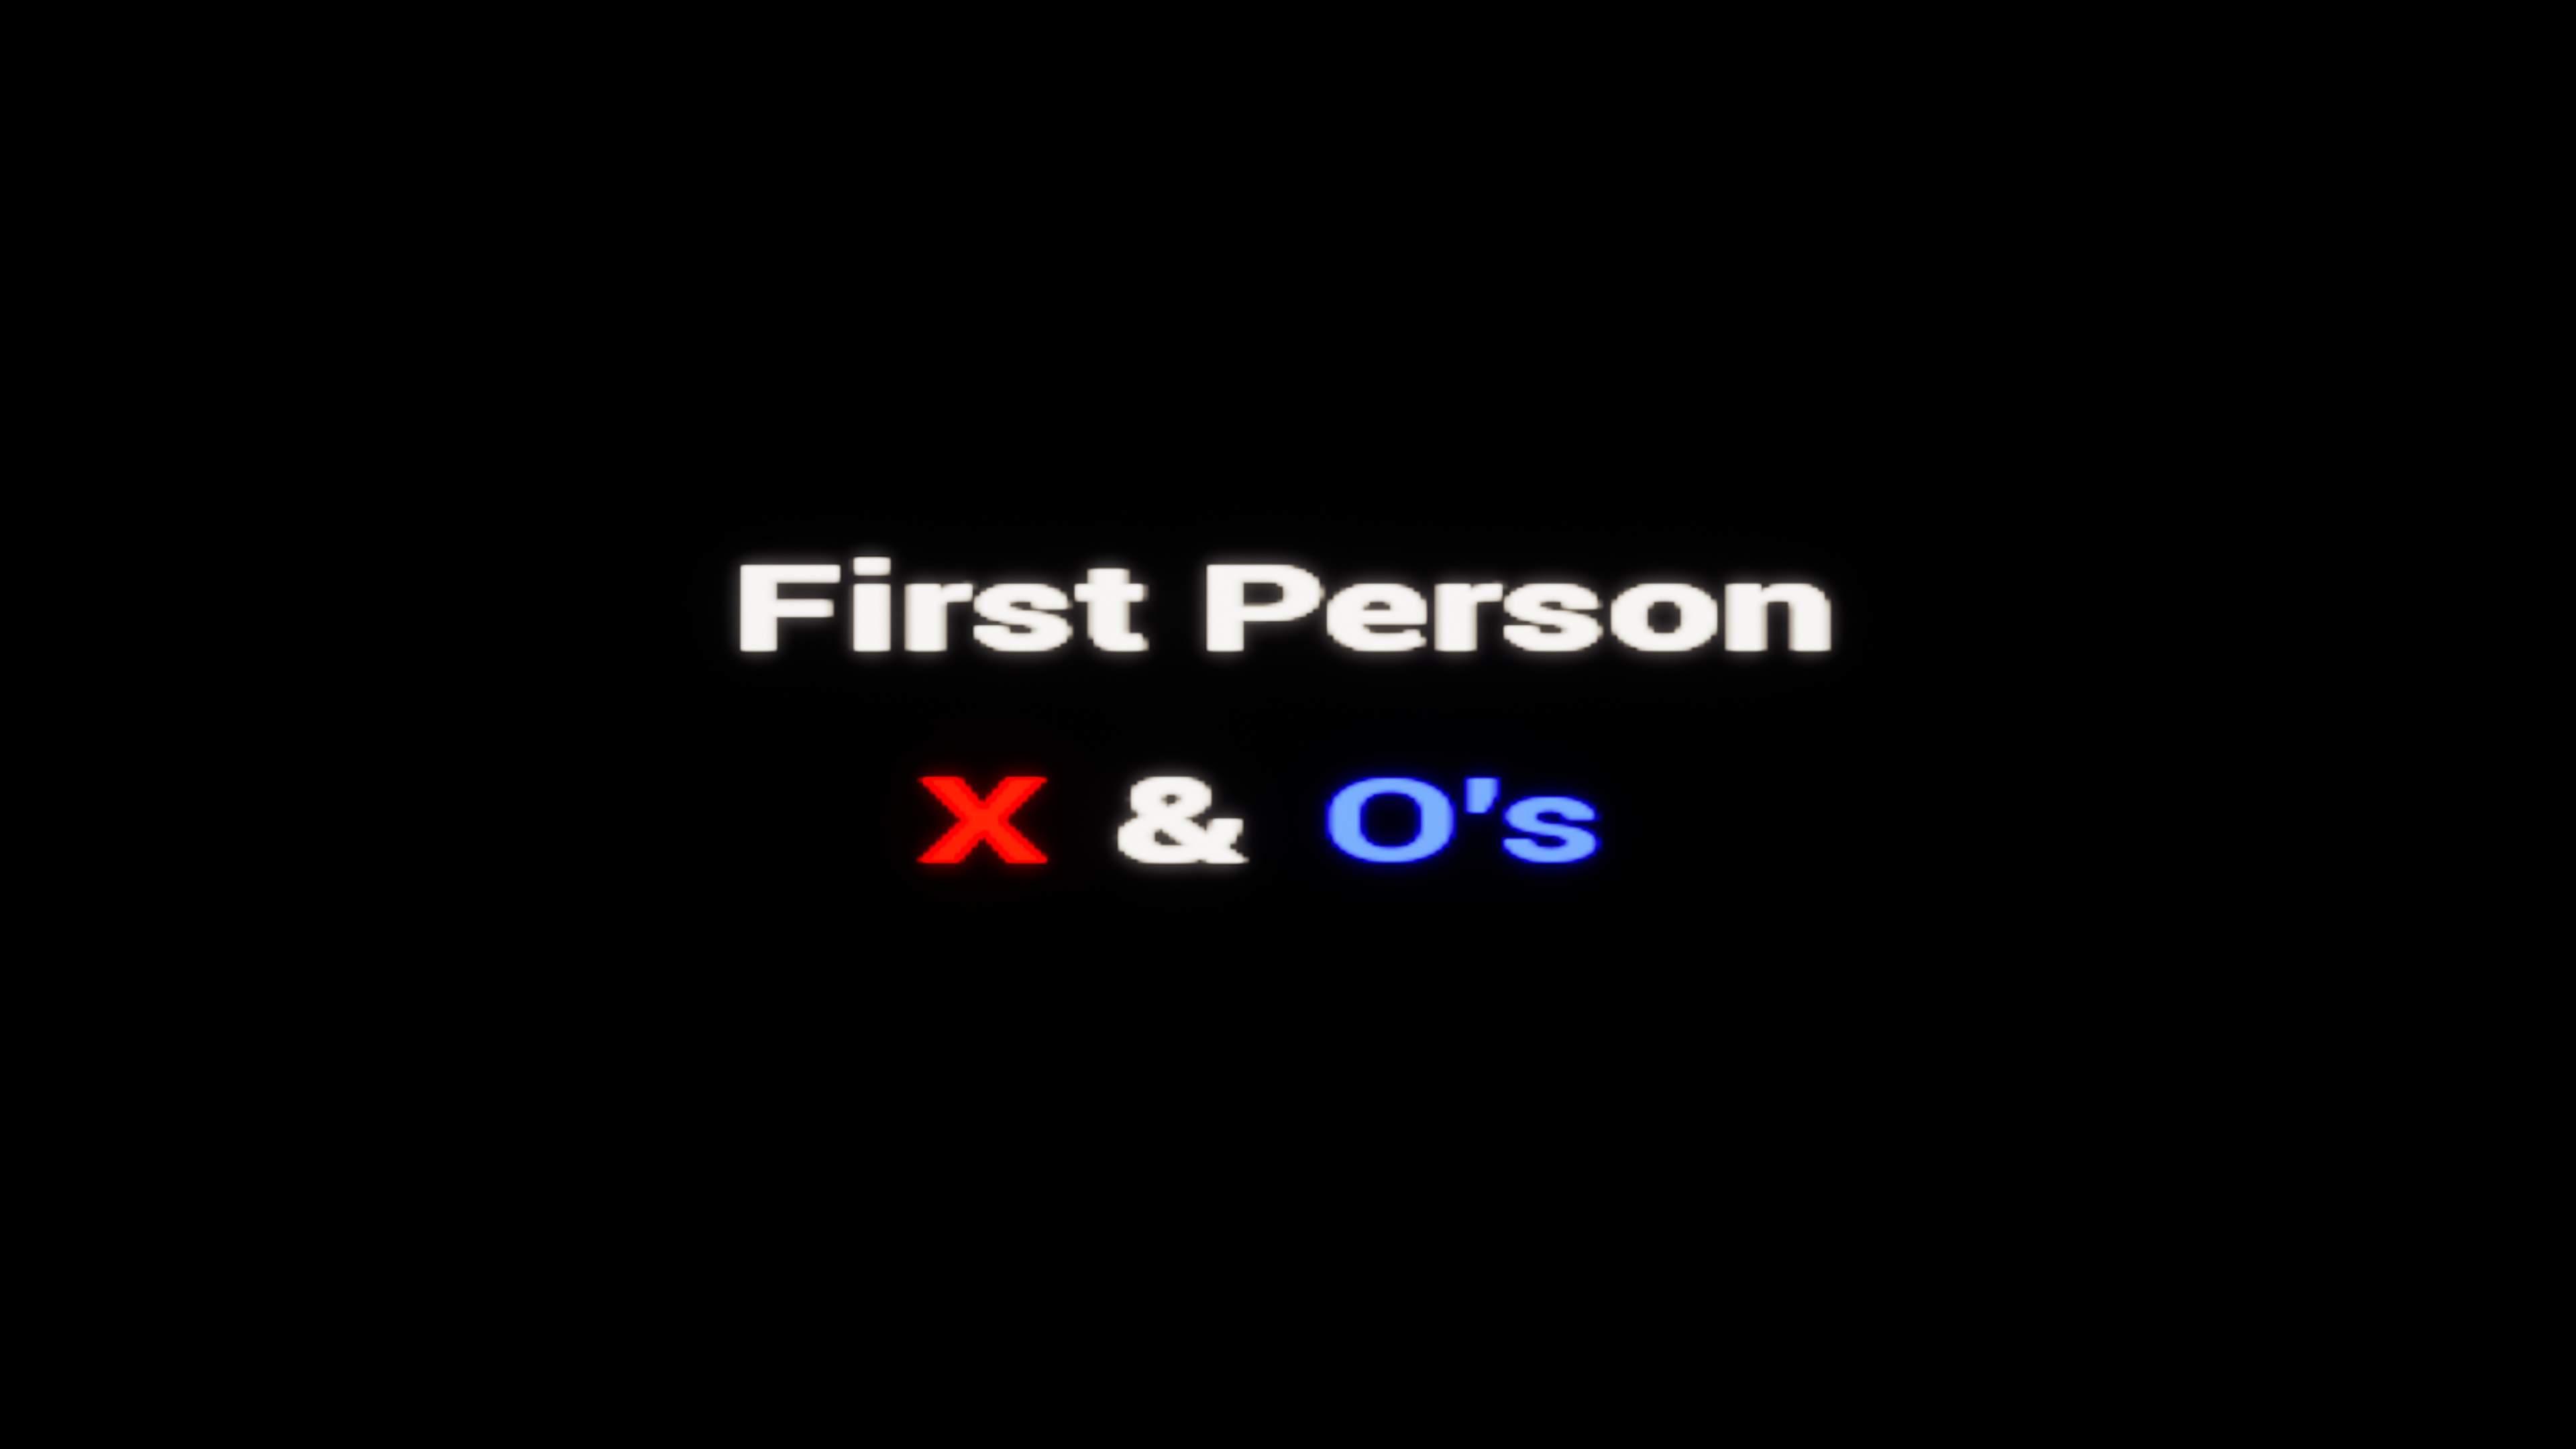 FIRST PERSON - X & O'S